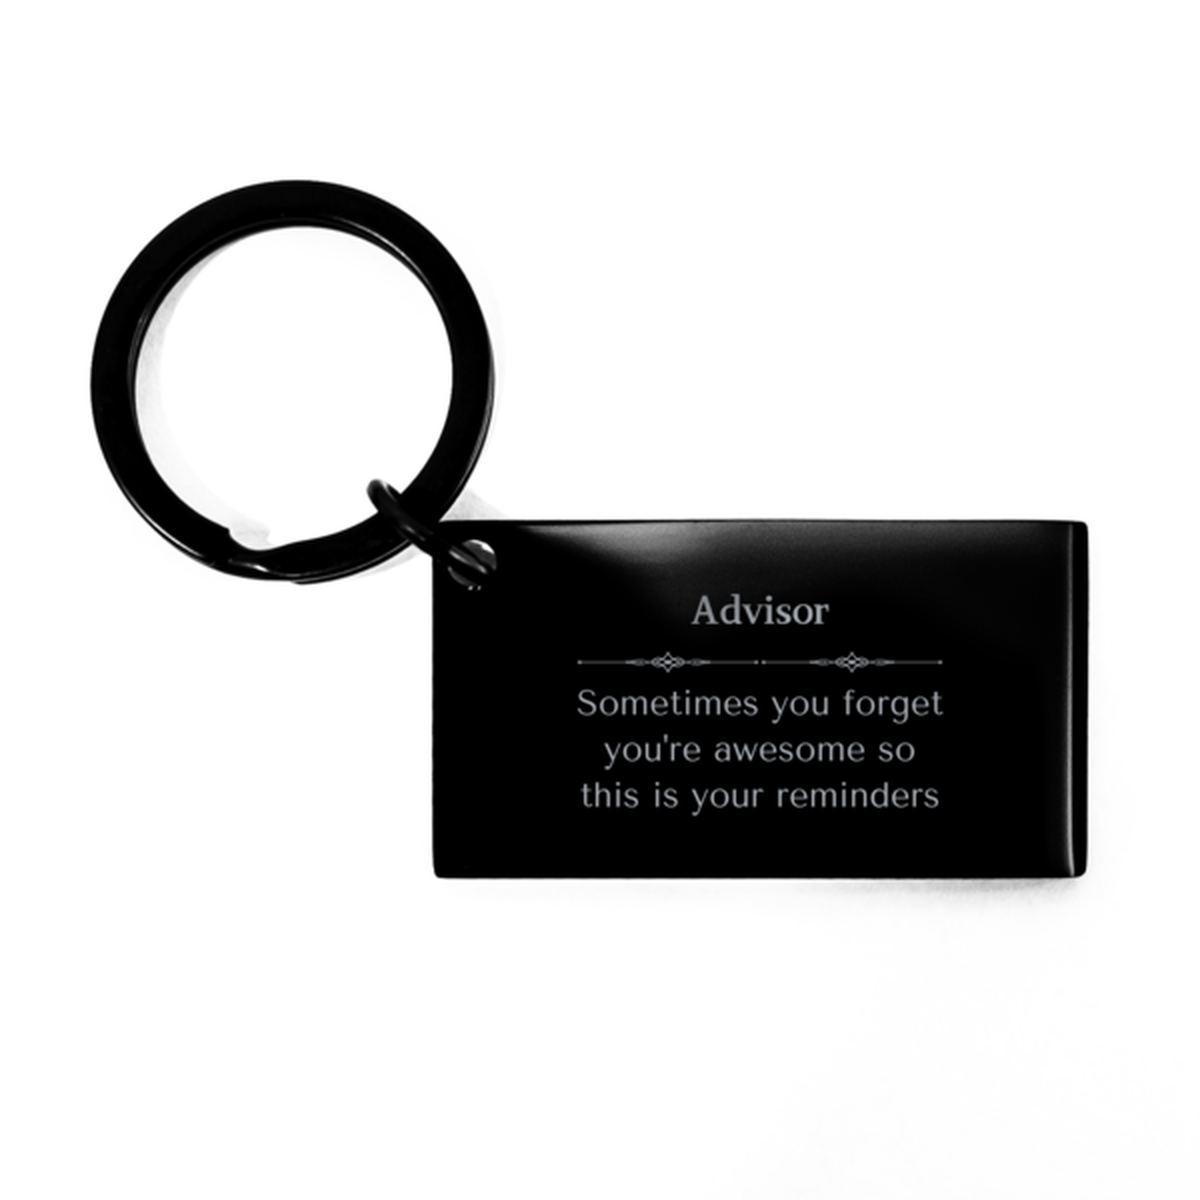 Sentimental Advisor Keychain, Carpenter Sometimes you forget you're awesome so this is your reminders, Graduation Christmas Birthday Gifts for Advisor, Men, Women, Coworkers